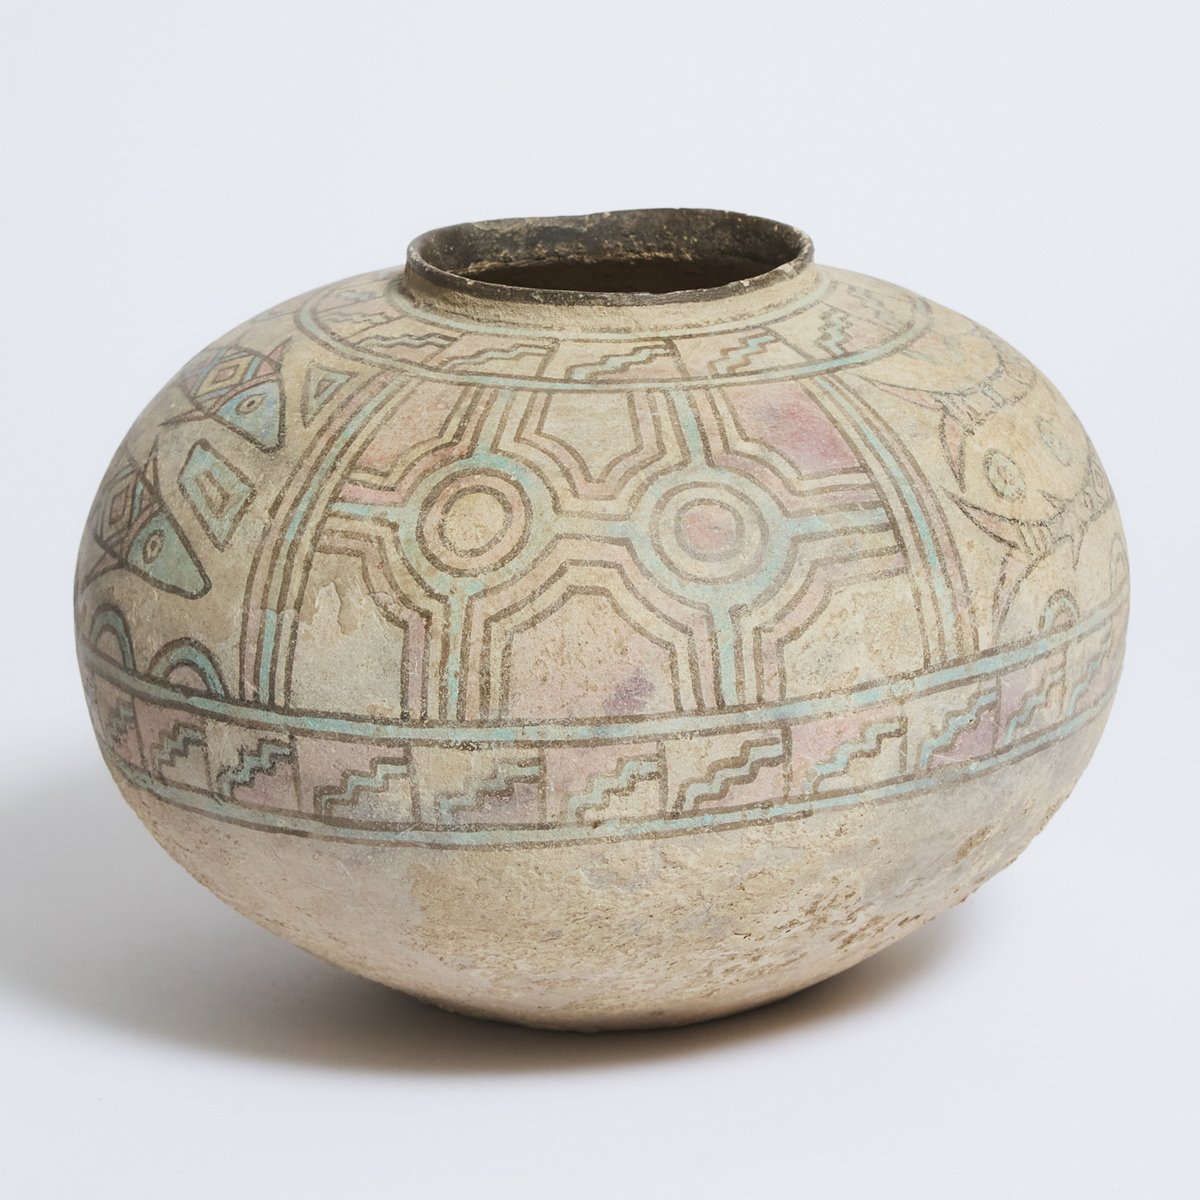 Indus Valley Civilization Polychromed Pottery Jar, Mehrgarh, 2600-2000 BC, height 8.6 in — 21.8 cm, - Image 2 of 4